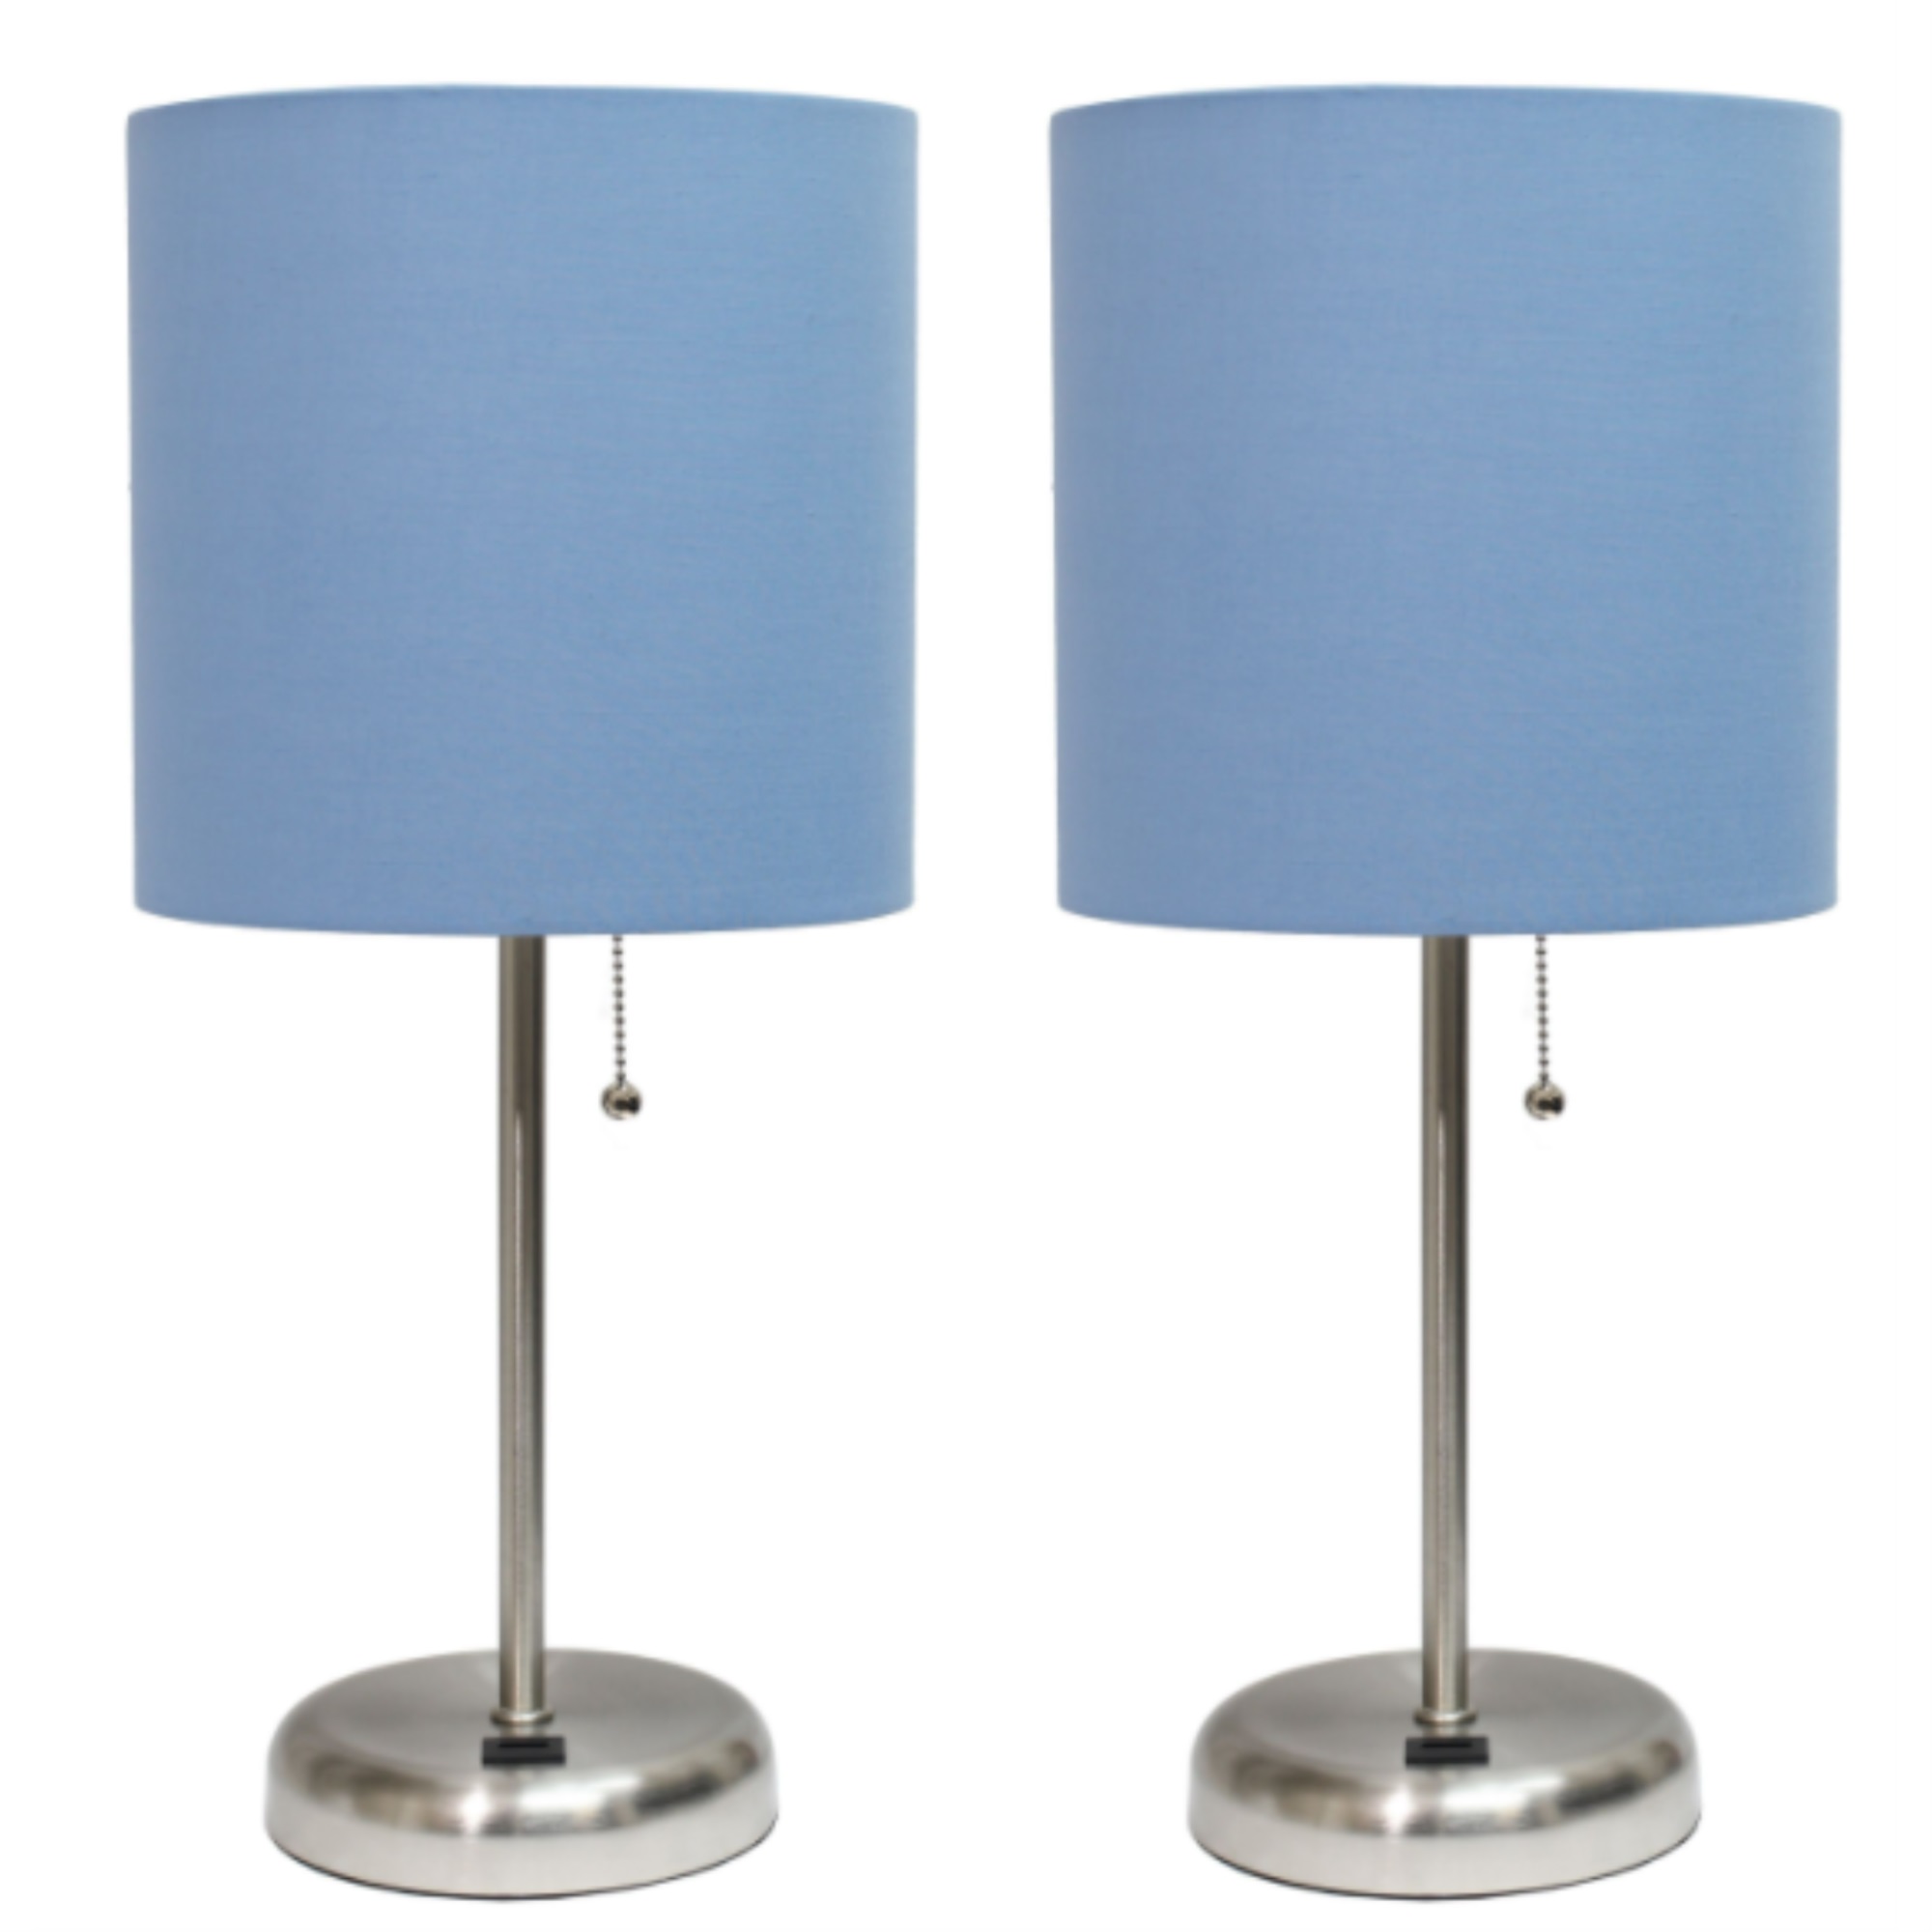 LimeLights Stick Lamp with USB charging port and Fabric Shade 2 Pack Set, Blue 